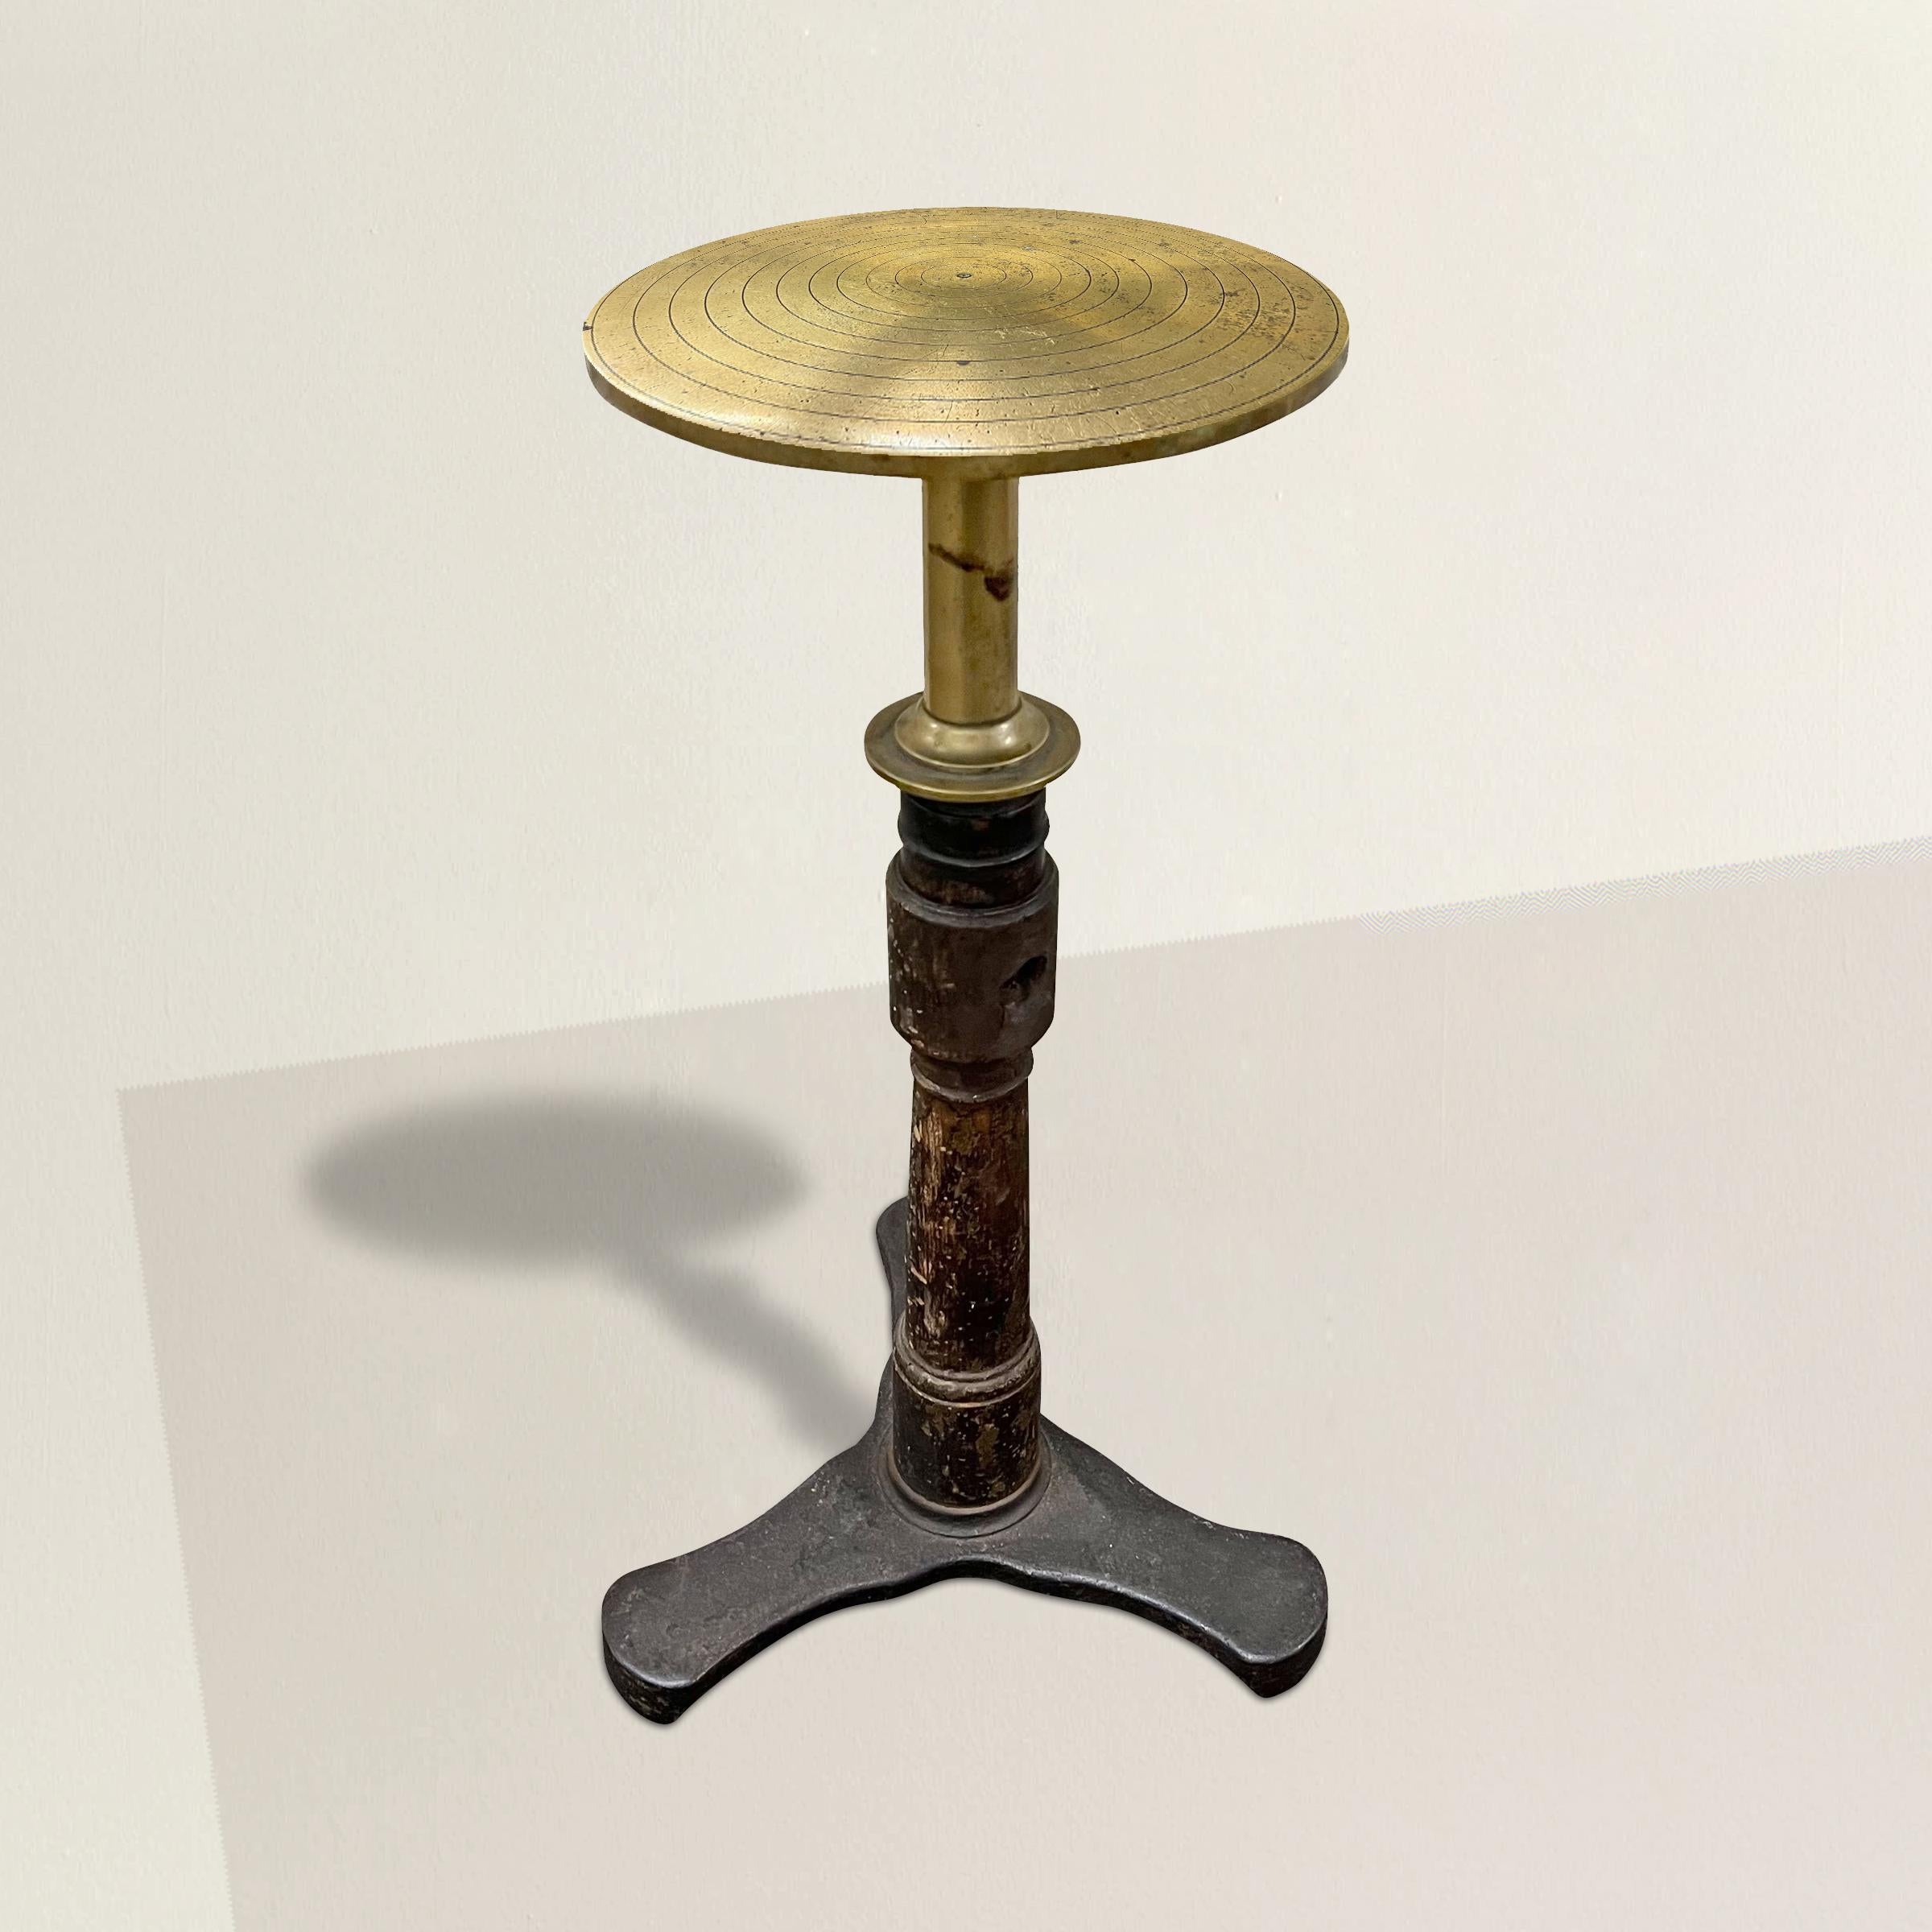 Uncover the artistic legacy of the 19th century with this exquisite French sculptor's table, a testament to the craftsmanship of the era. Originally used by a ceramic artist to create small pottery pieces, this table has now found a new purpose in